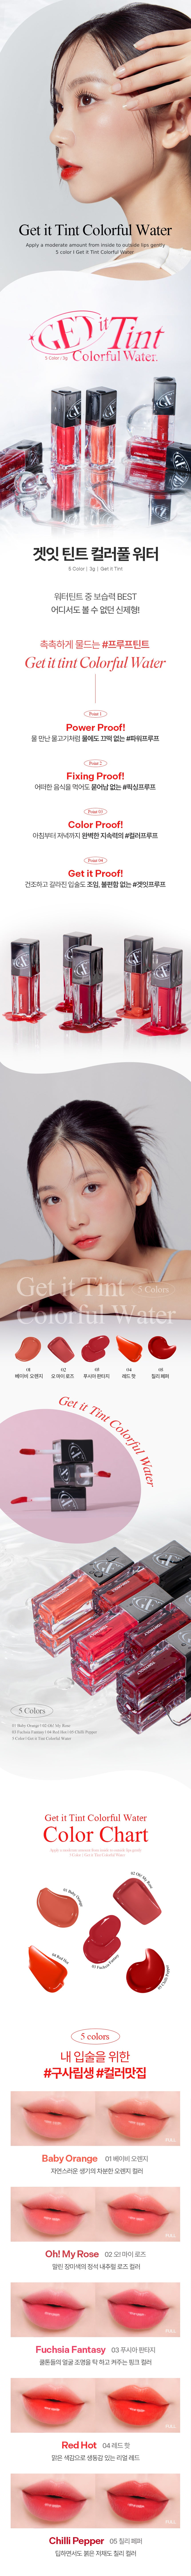 Tonymoly_Get It Tint Colorful Water 3g_1